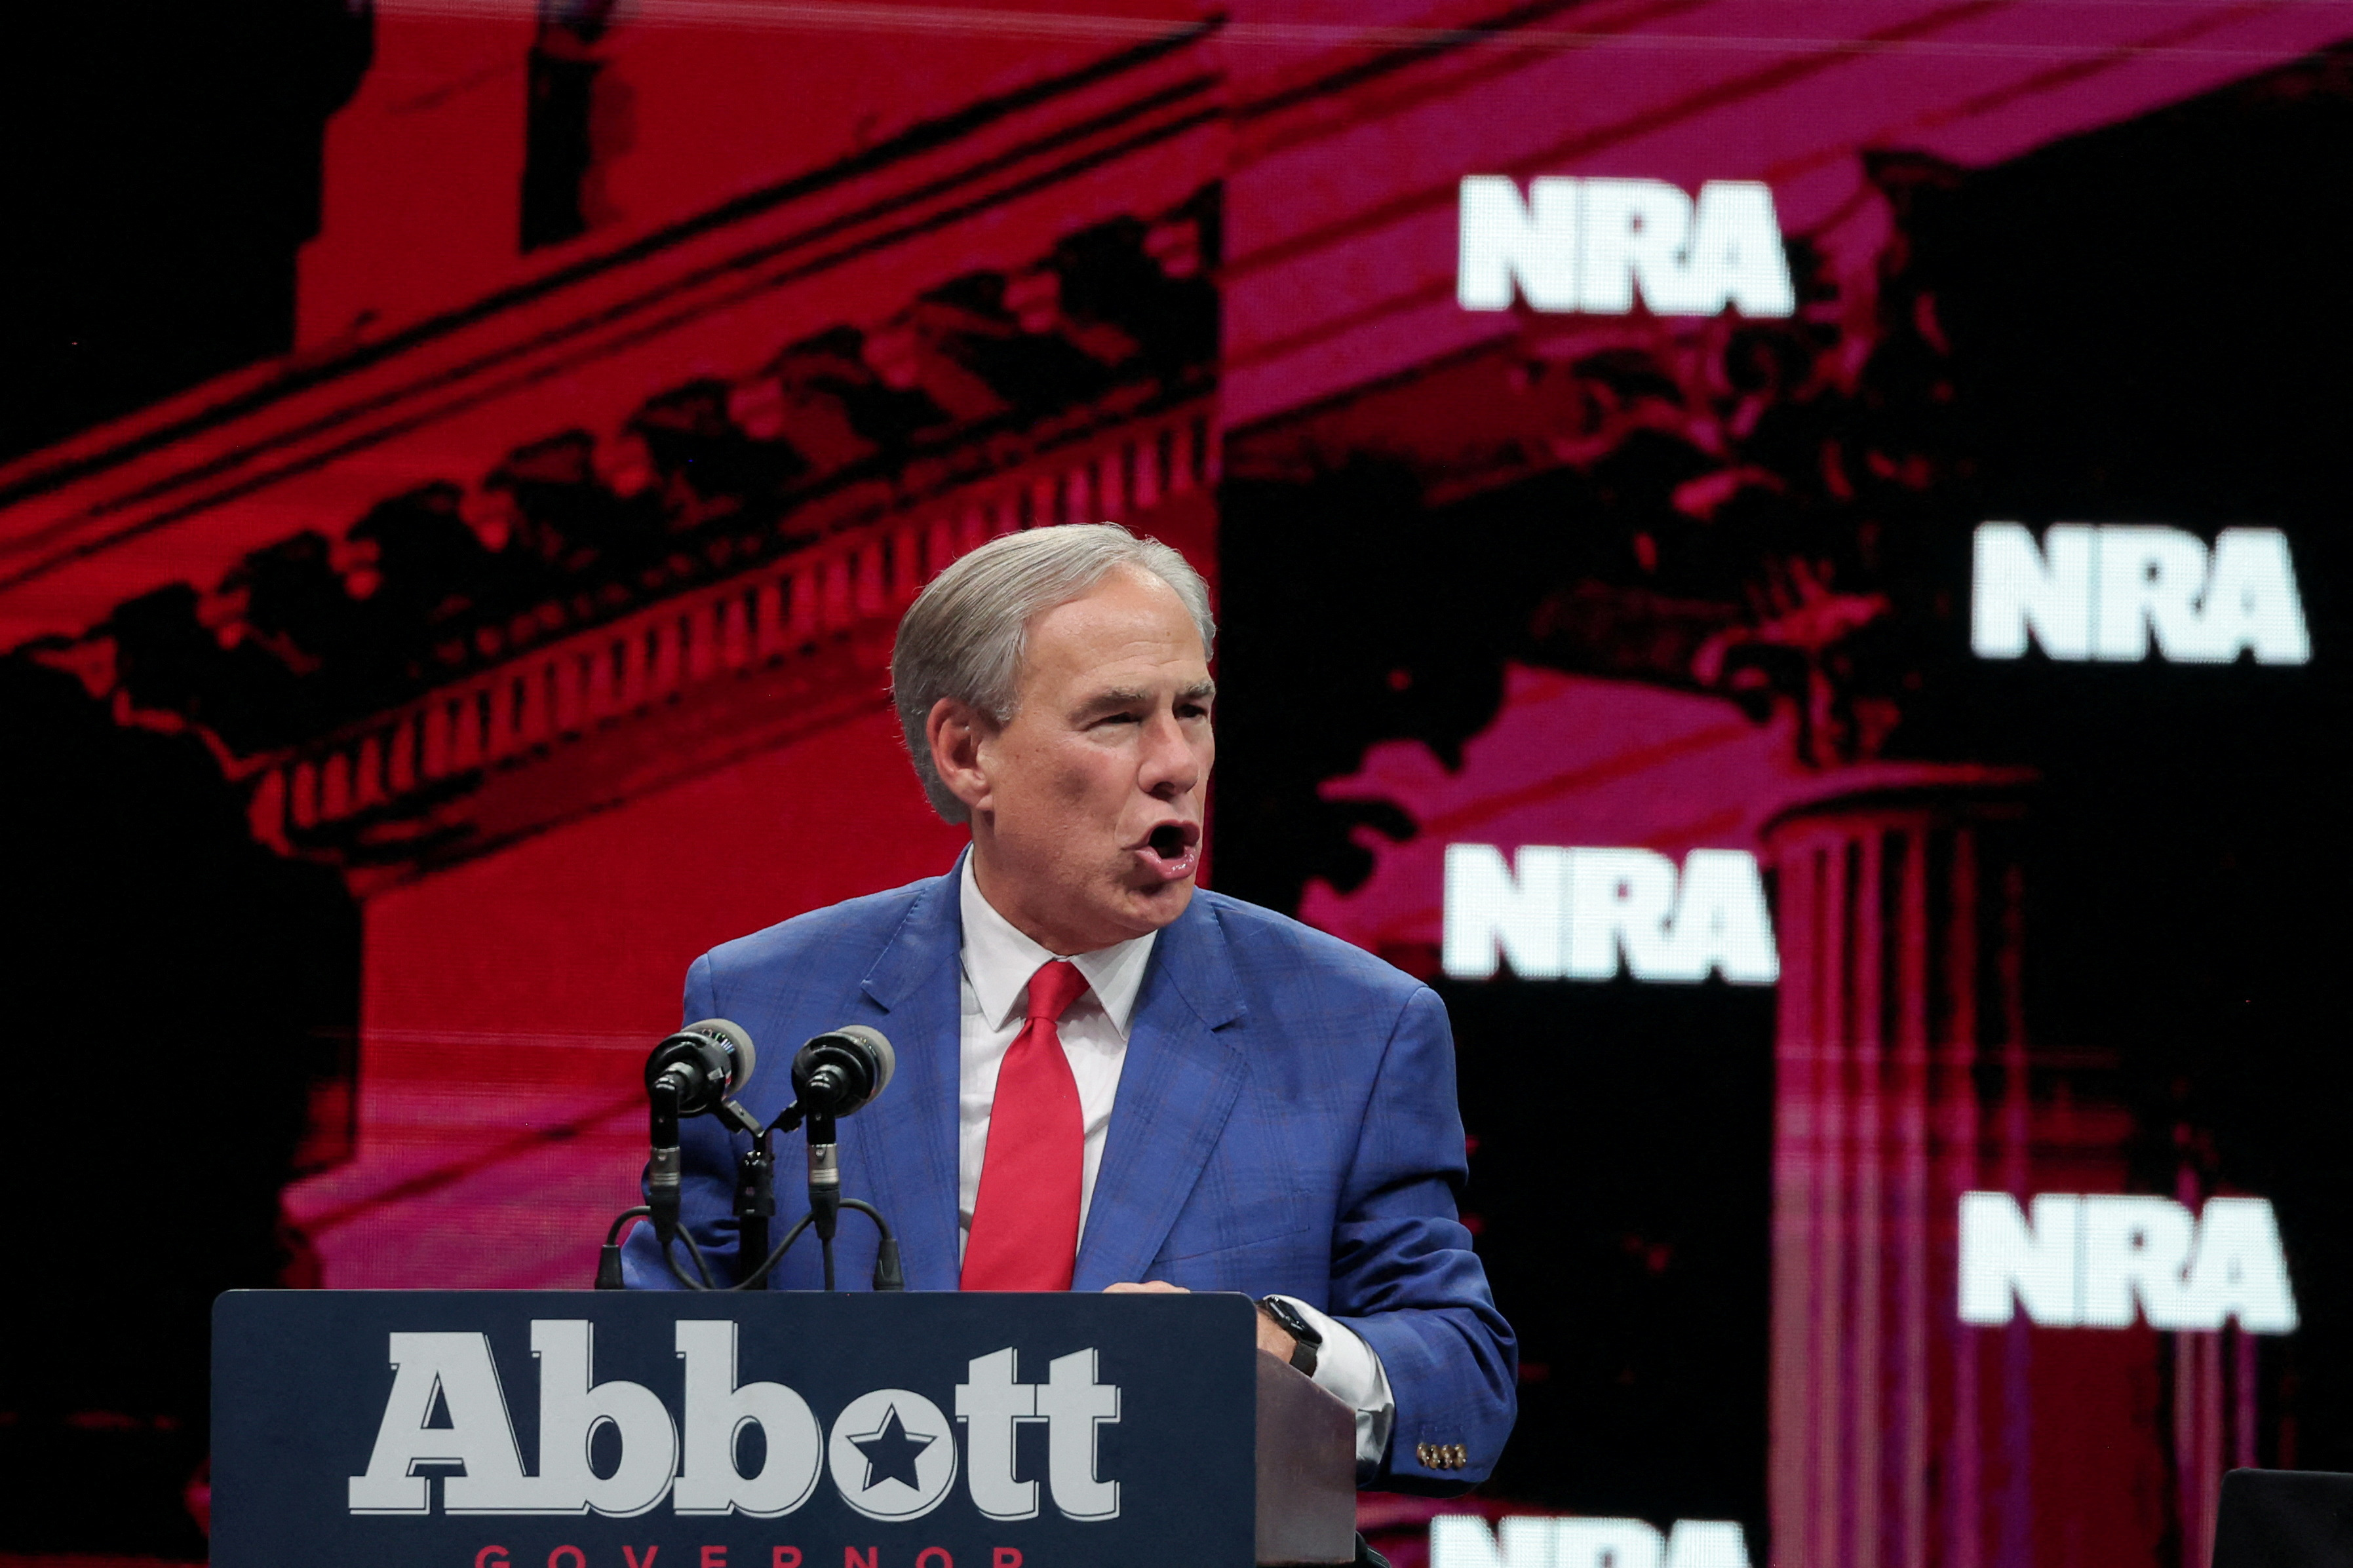 The National Rifle Association (NRA) annual meeting in Dallas